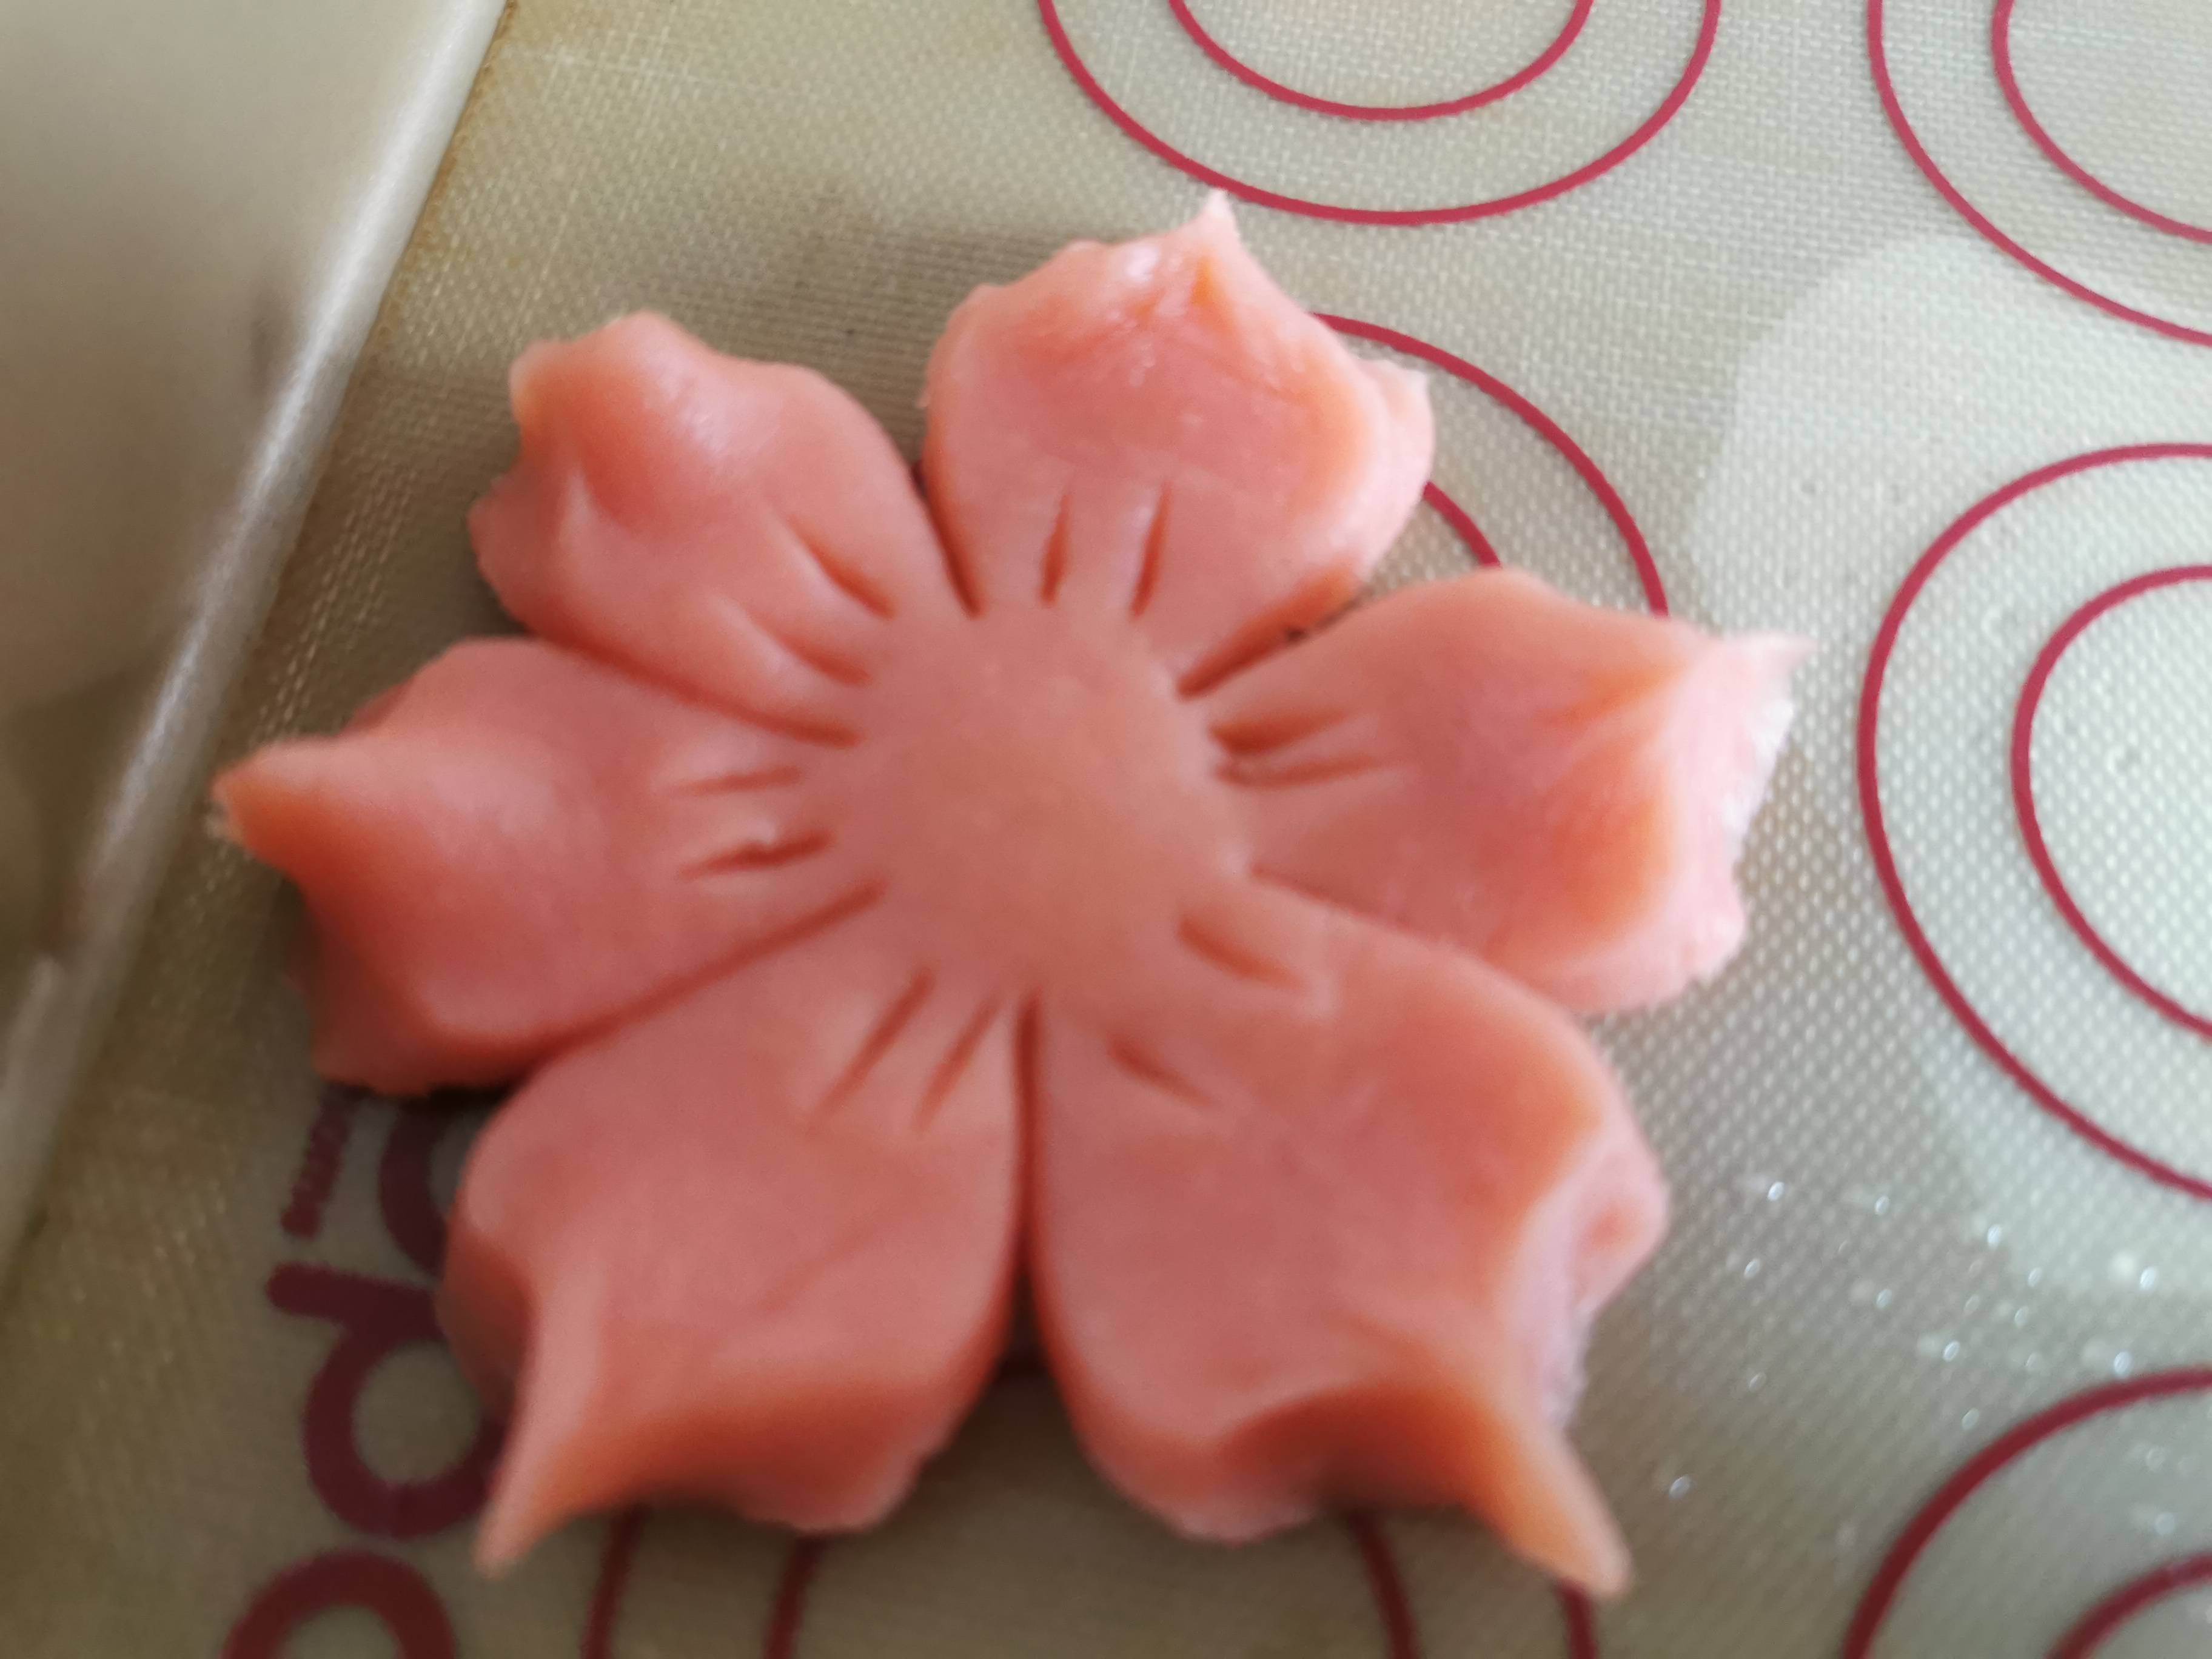 Peach Blossom Butter Biscuit Edition recipe